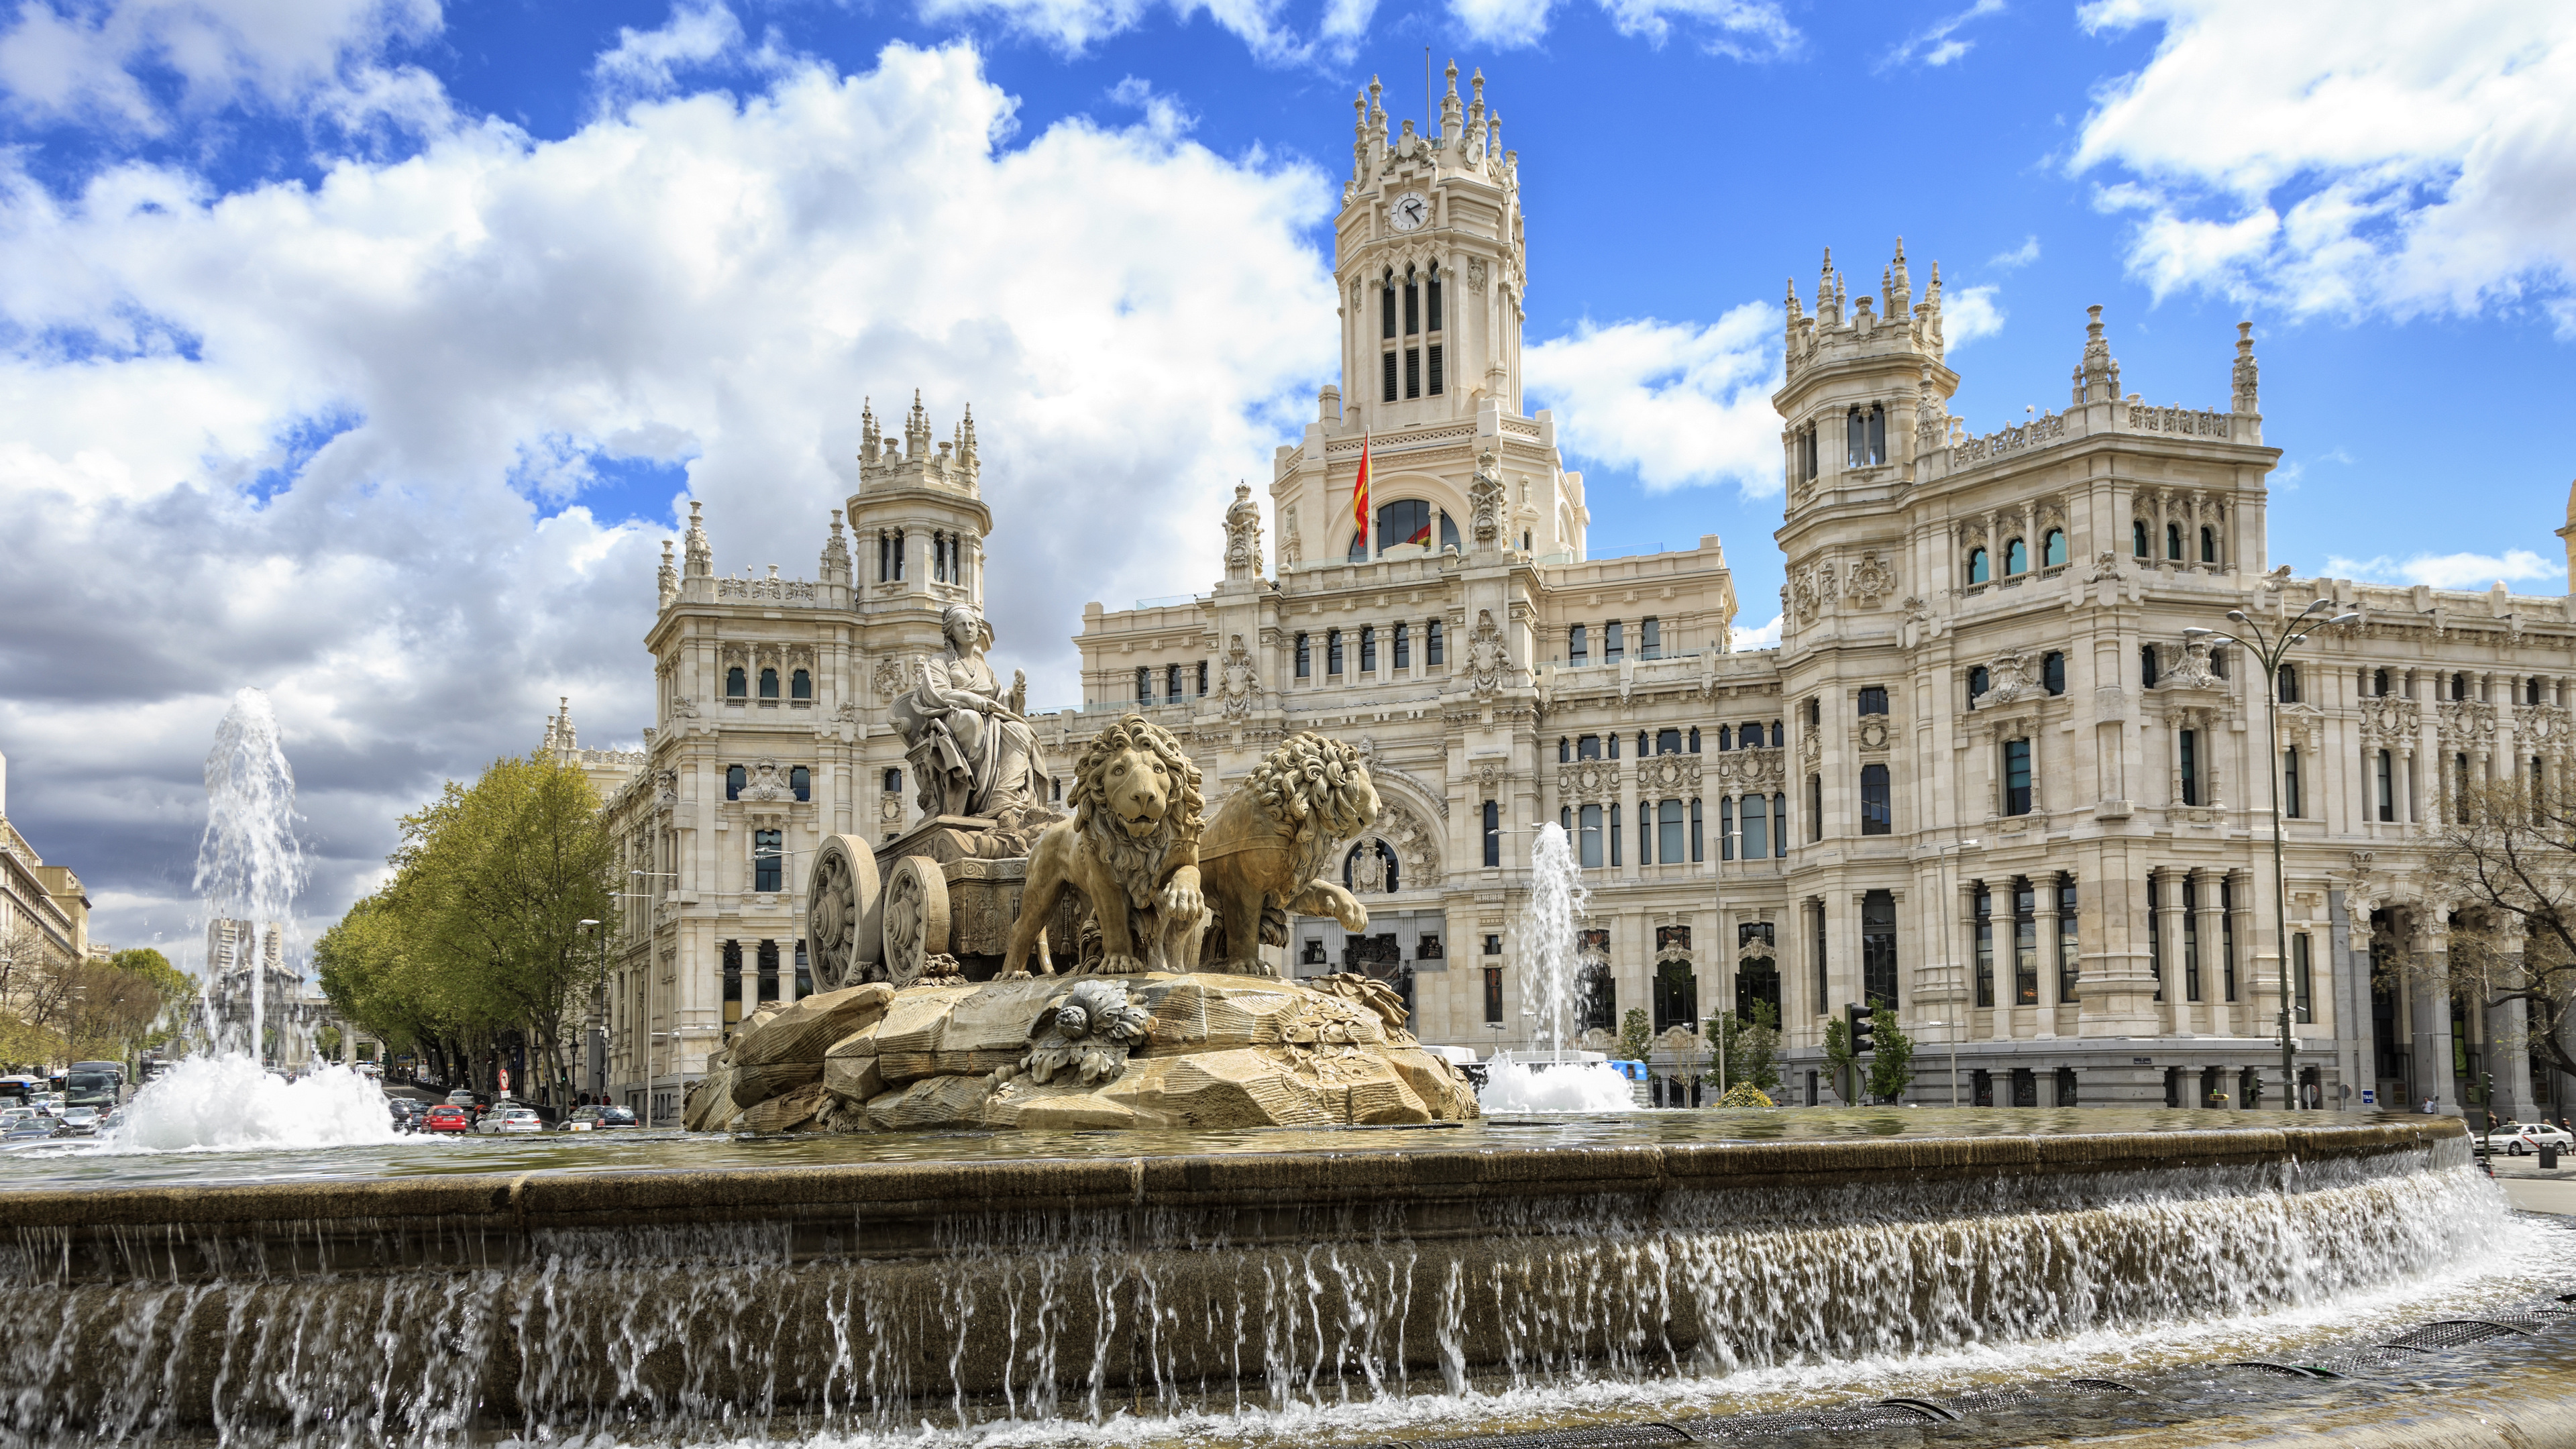 General 3840x2160 Spain Madrid city building fountain statue water sky clouds palace architecture lion